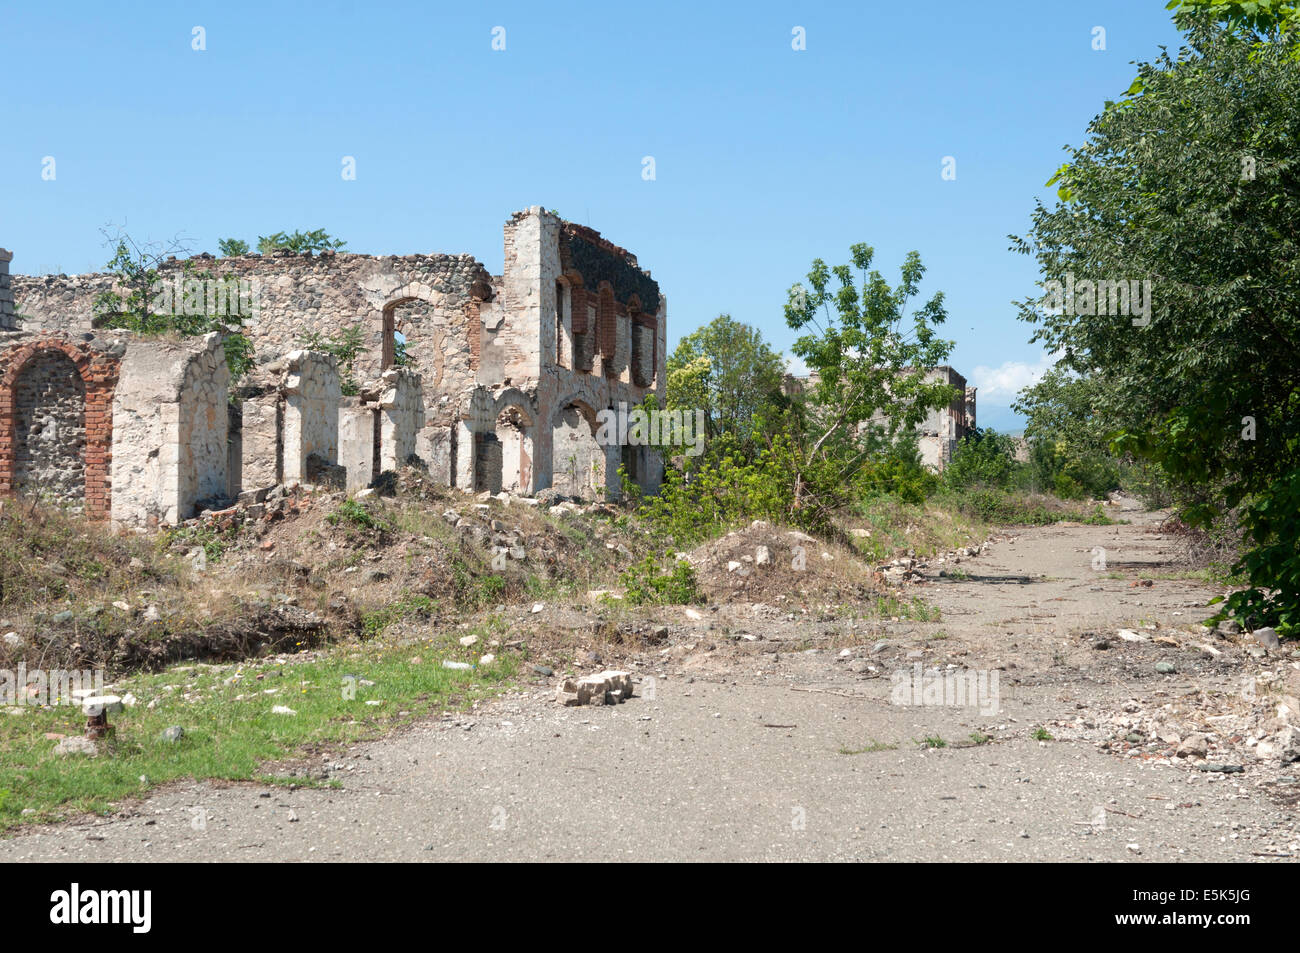 Destroyed building, Agdam ghost town, unrecognized state of Nagorno-Karabakh Stock Photo